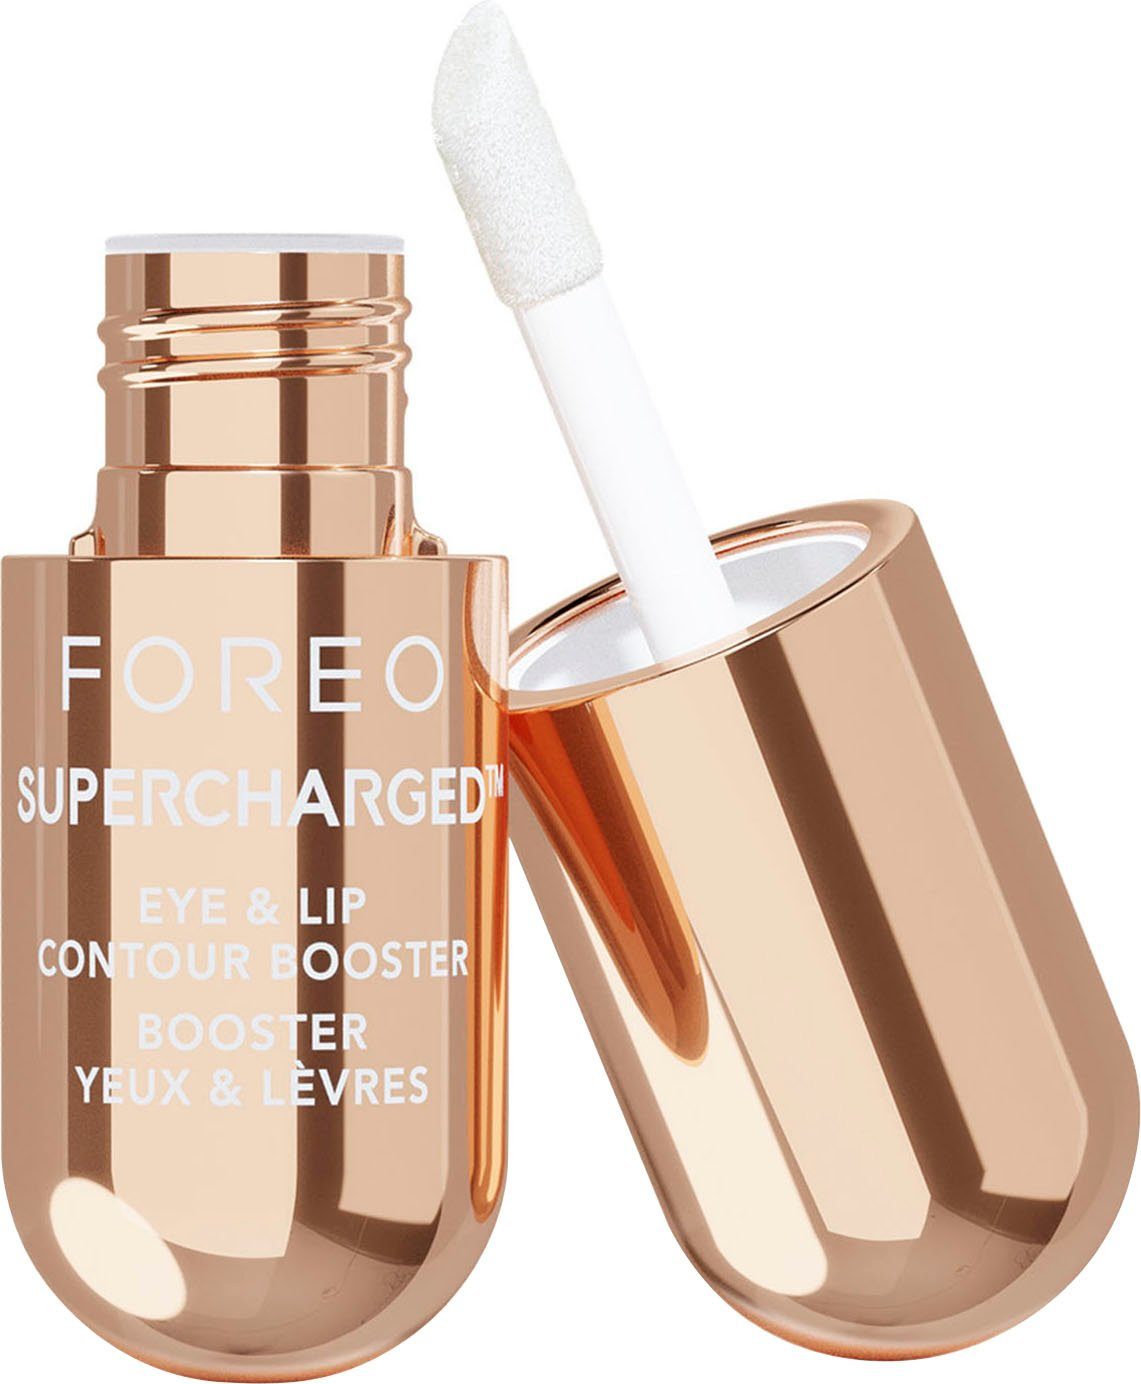 FOREO Feuchtigkeitsgel SUPERCHARGED™ EYE & LIP CONTOUR BOOSTER 3 x 3,5 ml  Packung,